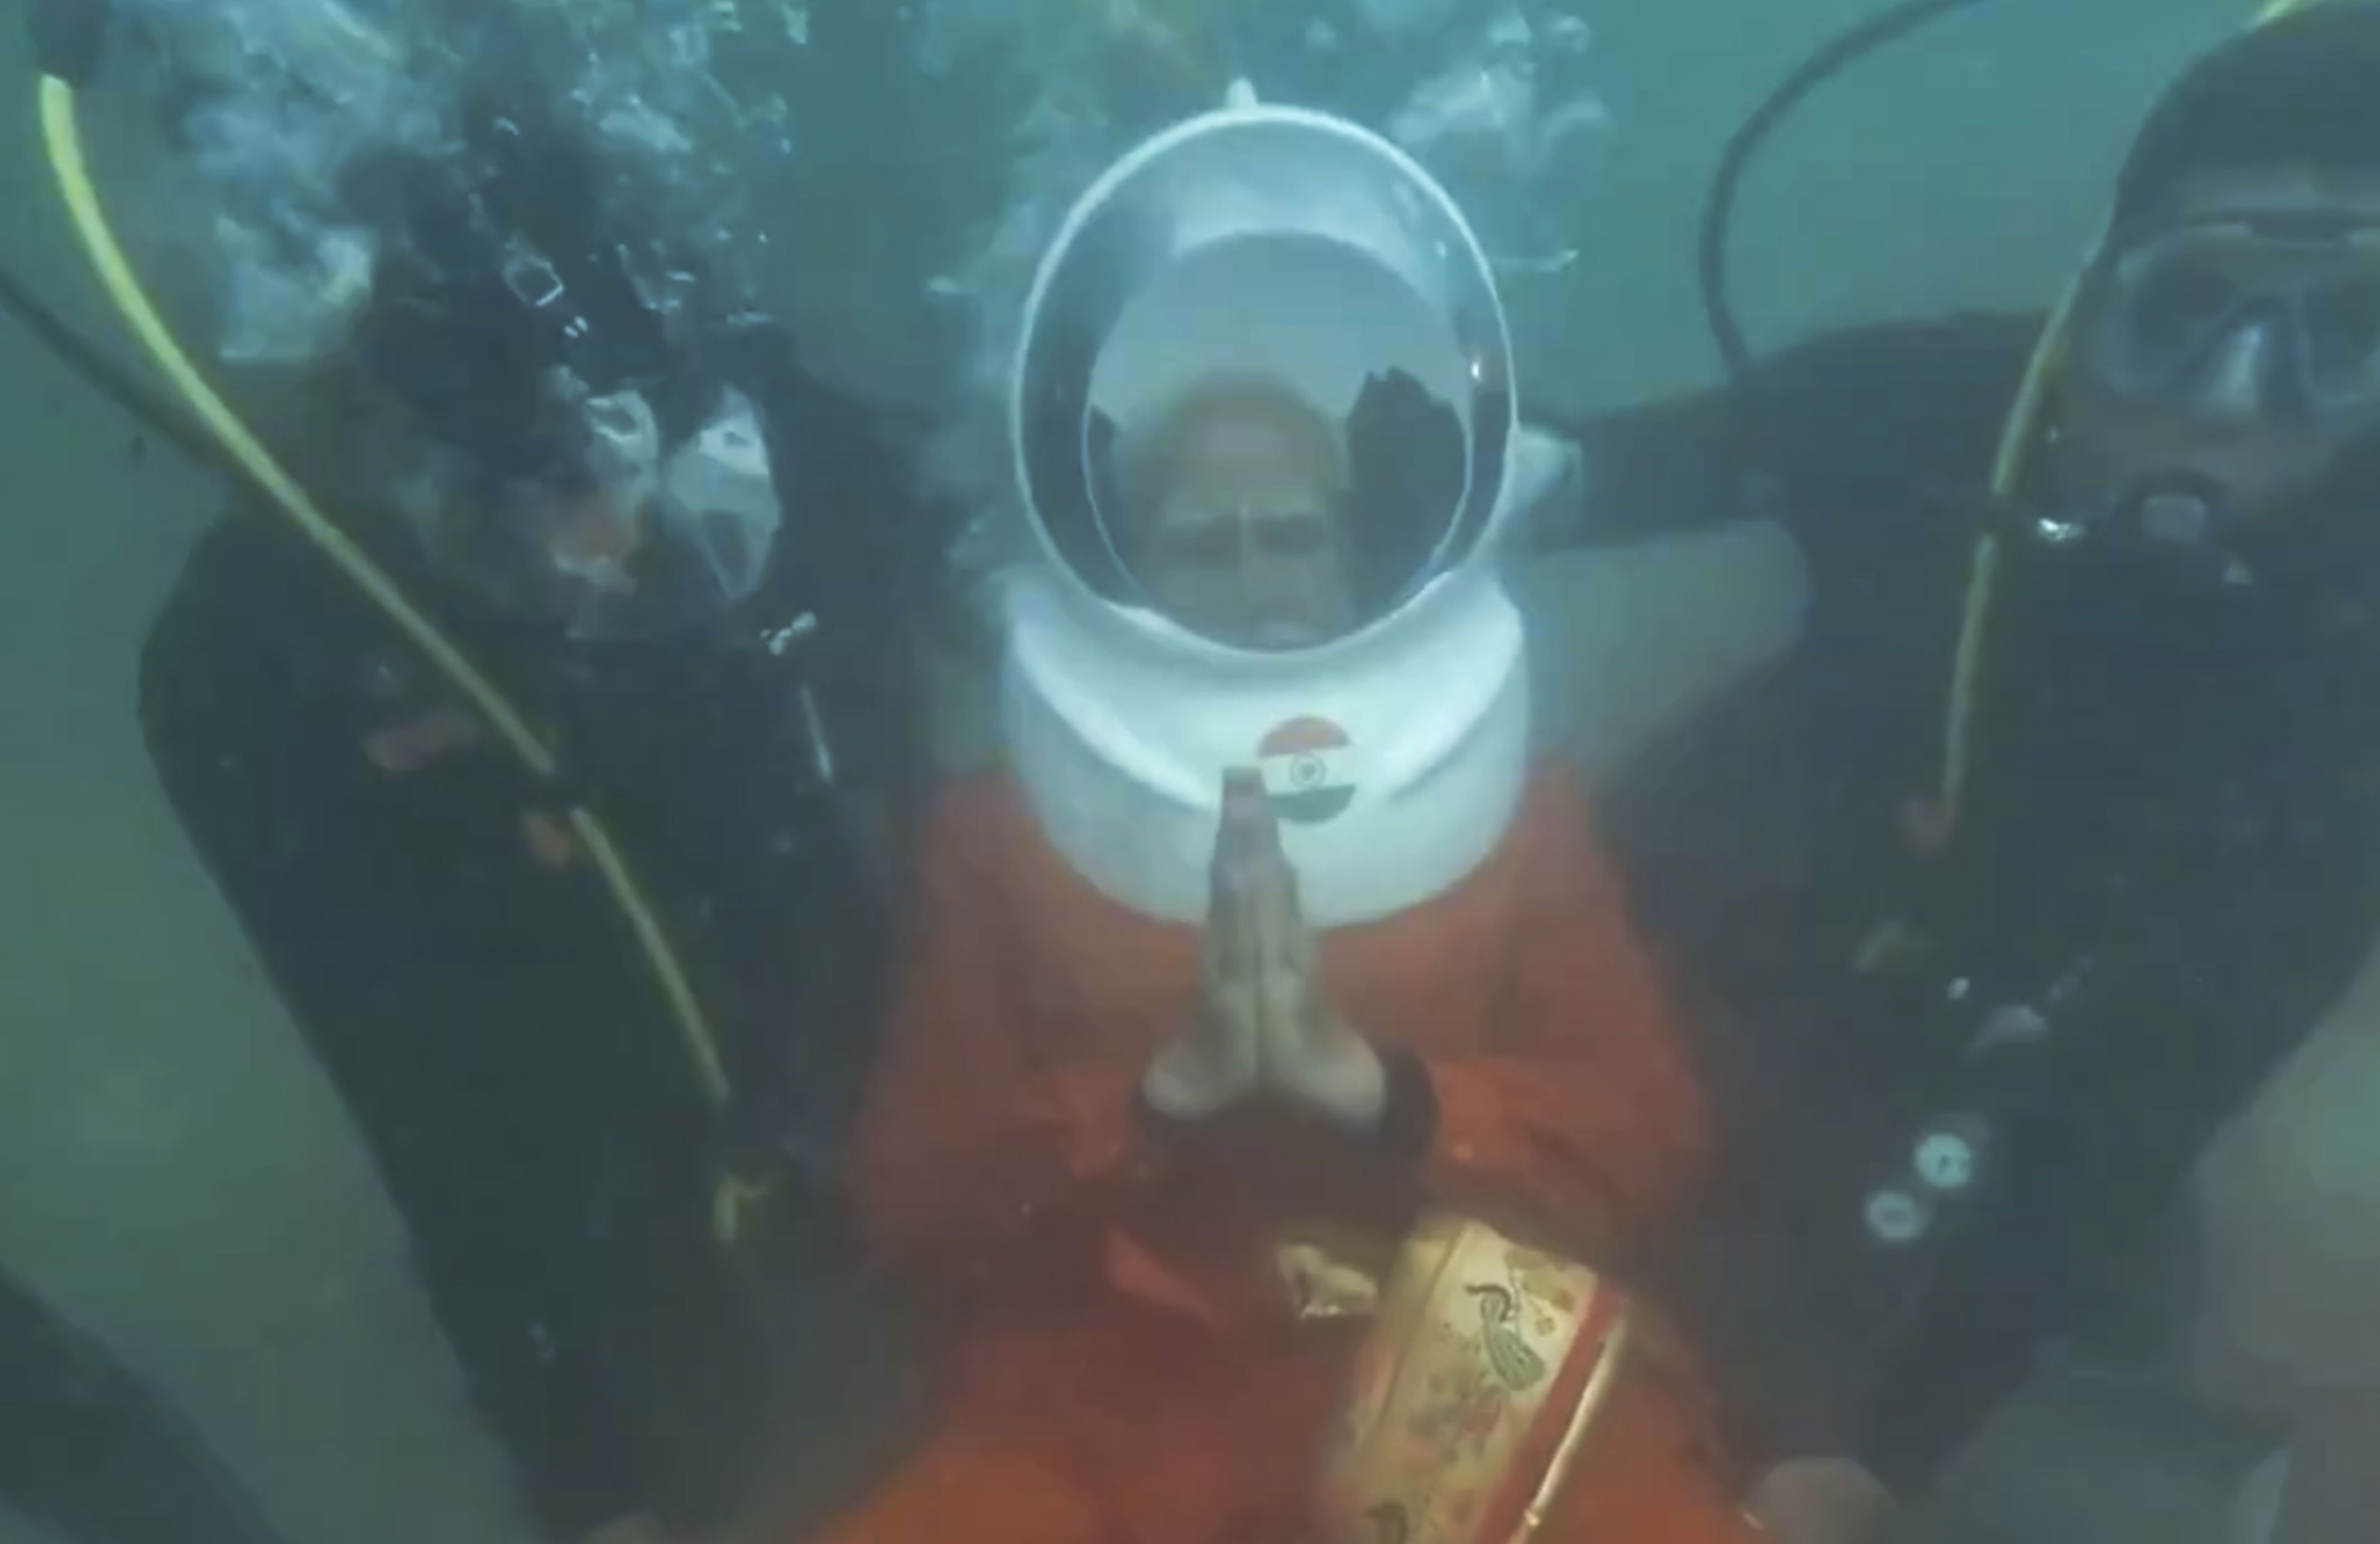 divine experience, says pm modi after scuba diving to perform prayers at ancient dwarka city